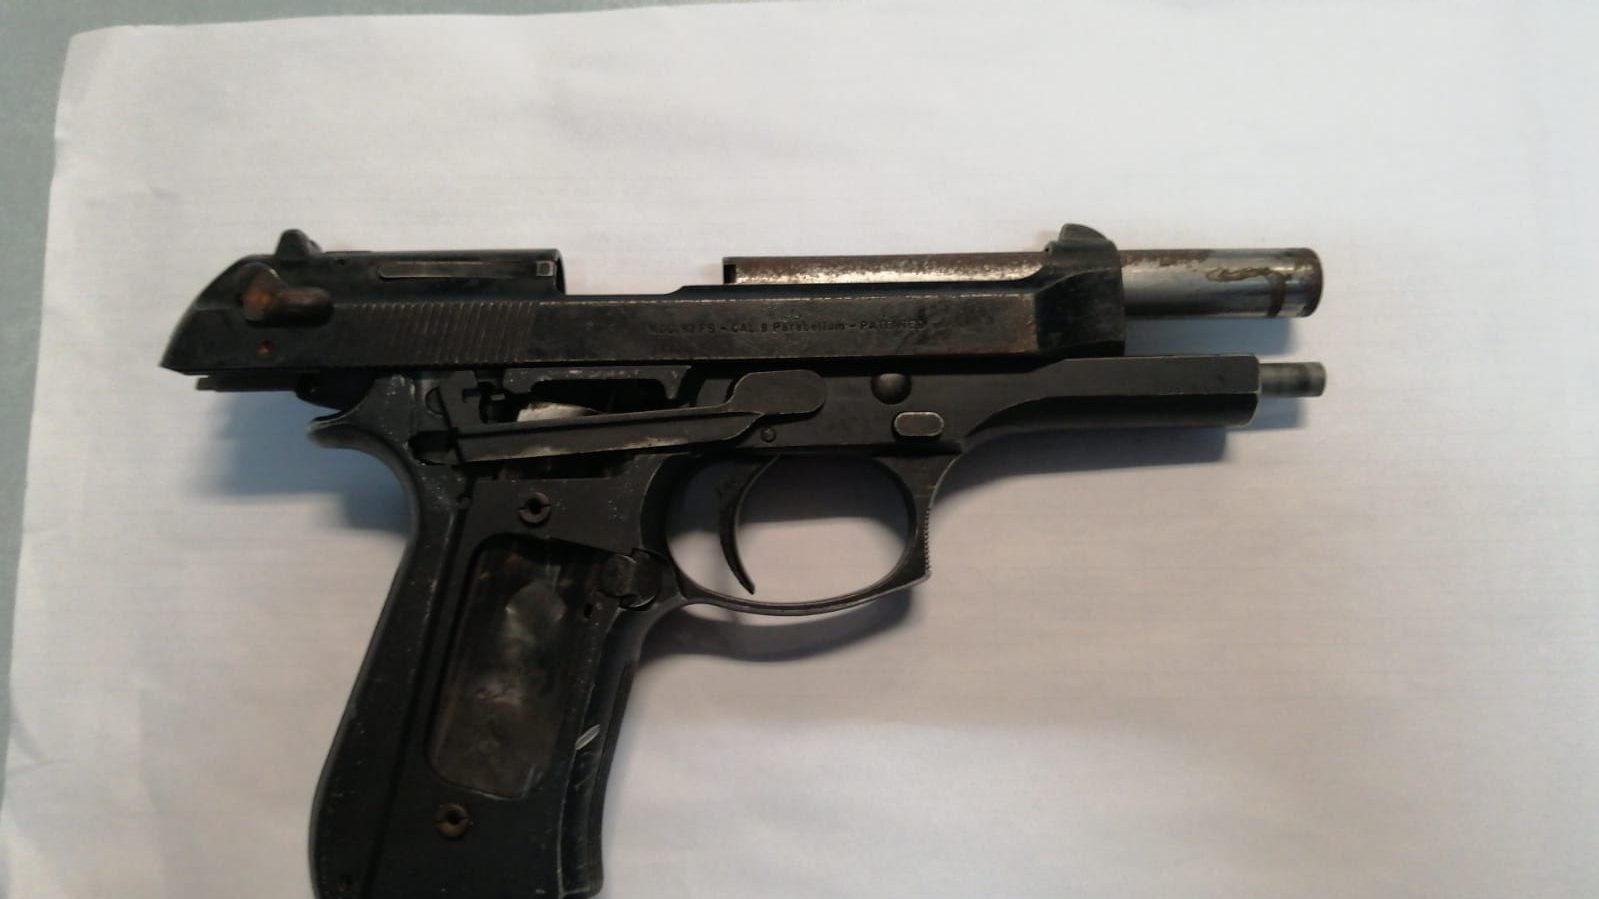 Man jailed for 3 years for possession of pistol